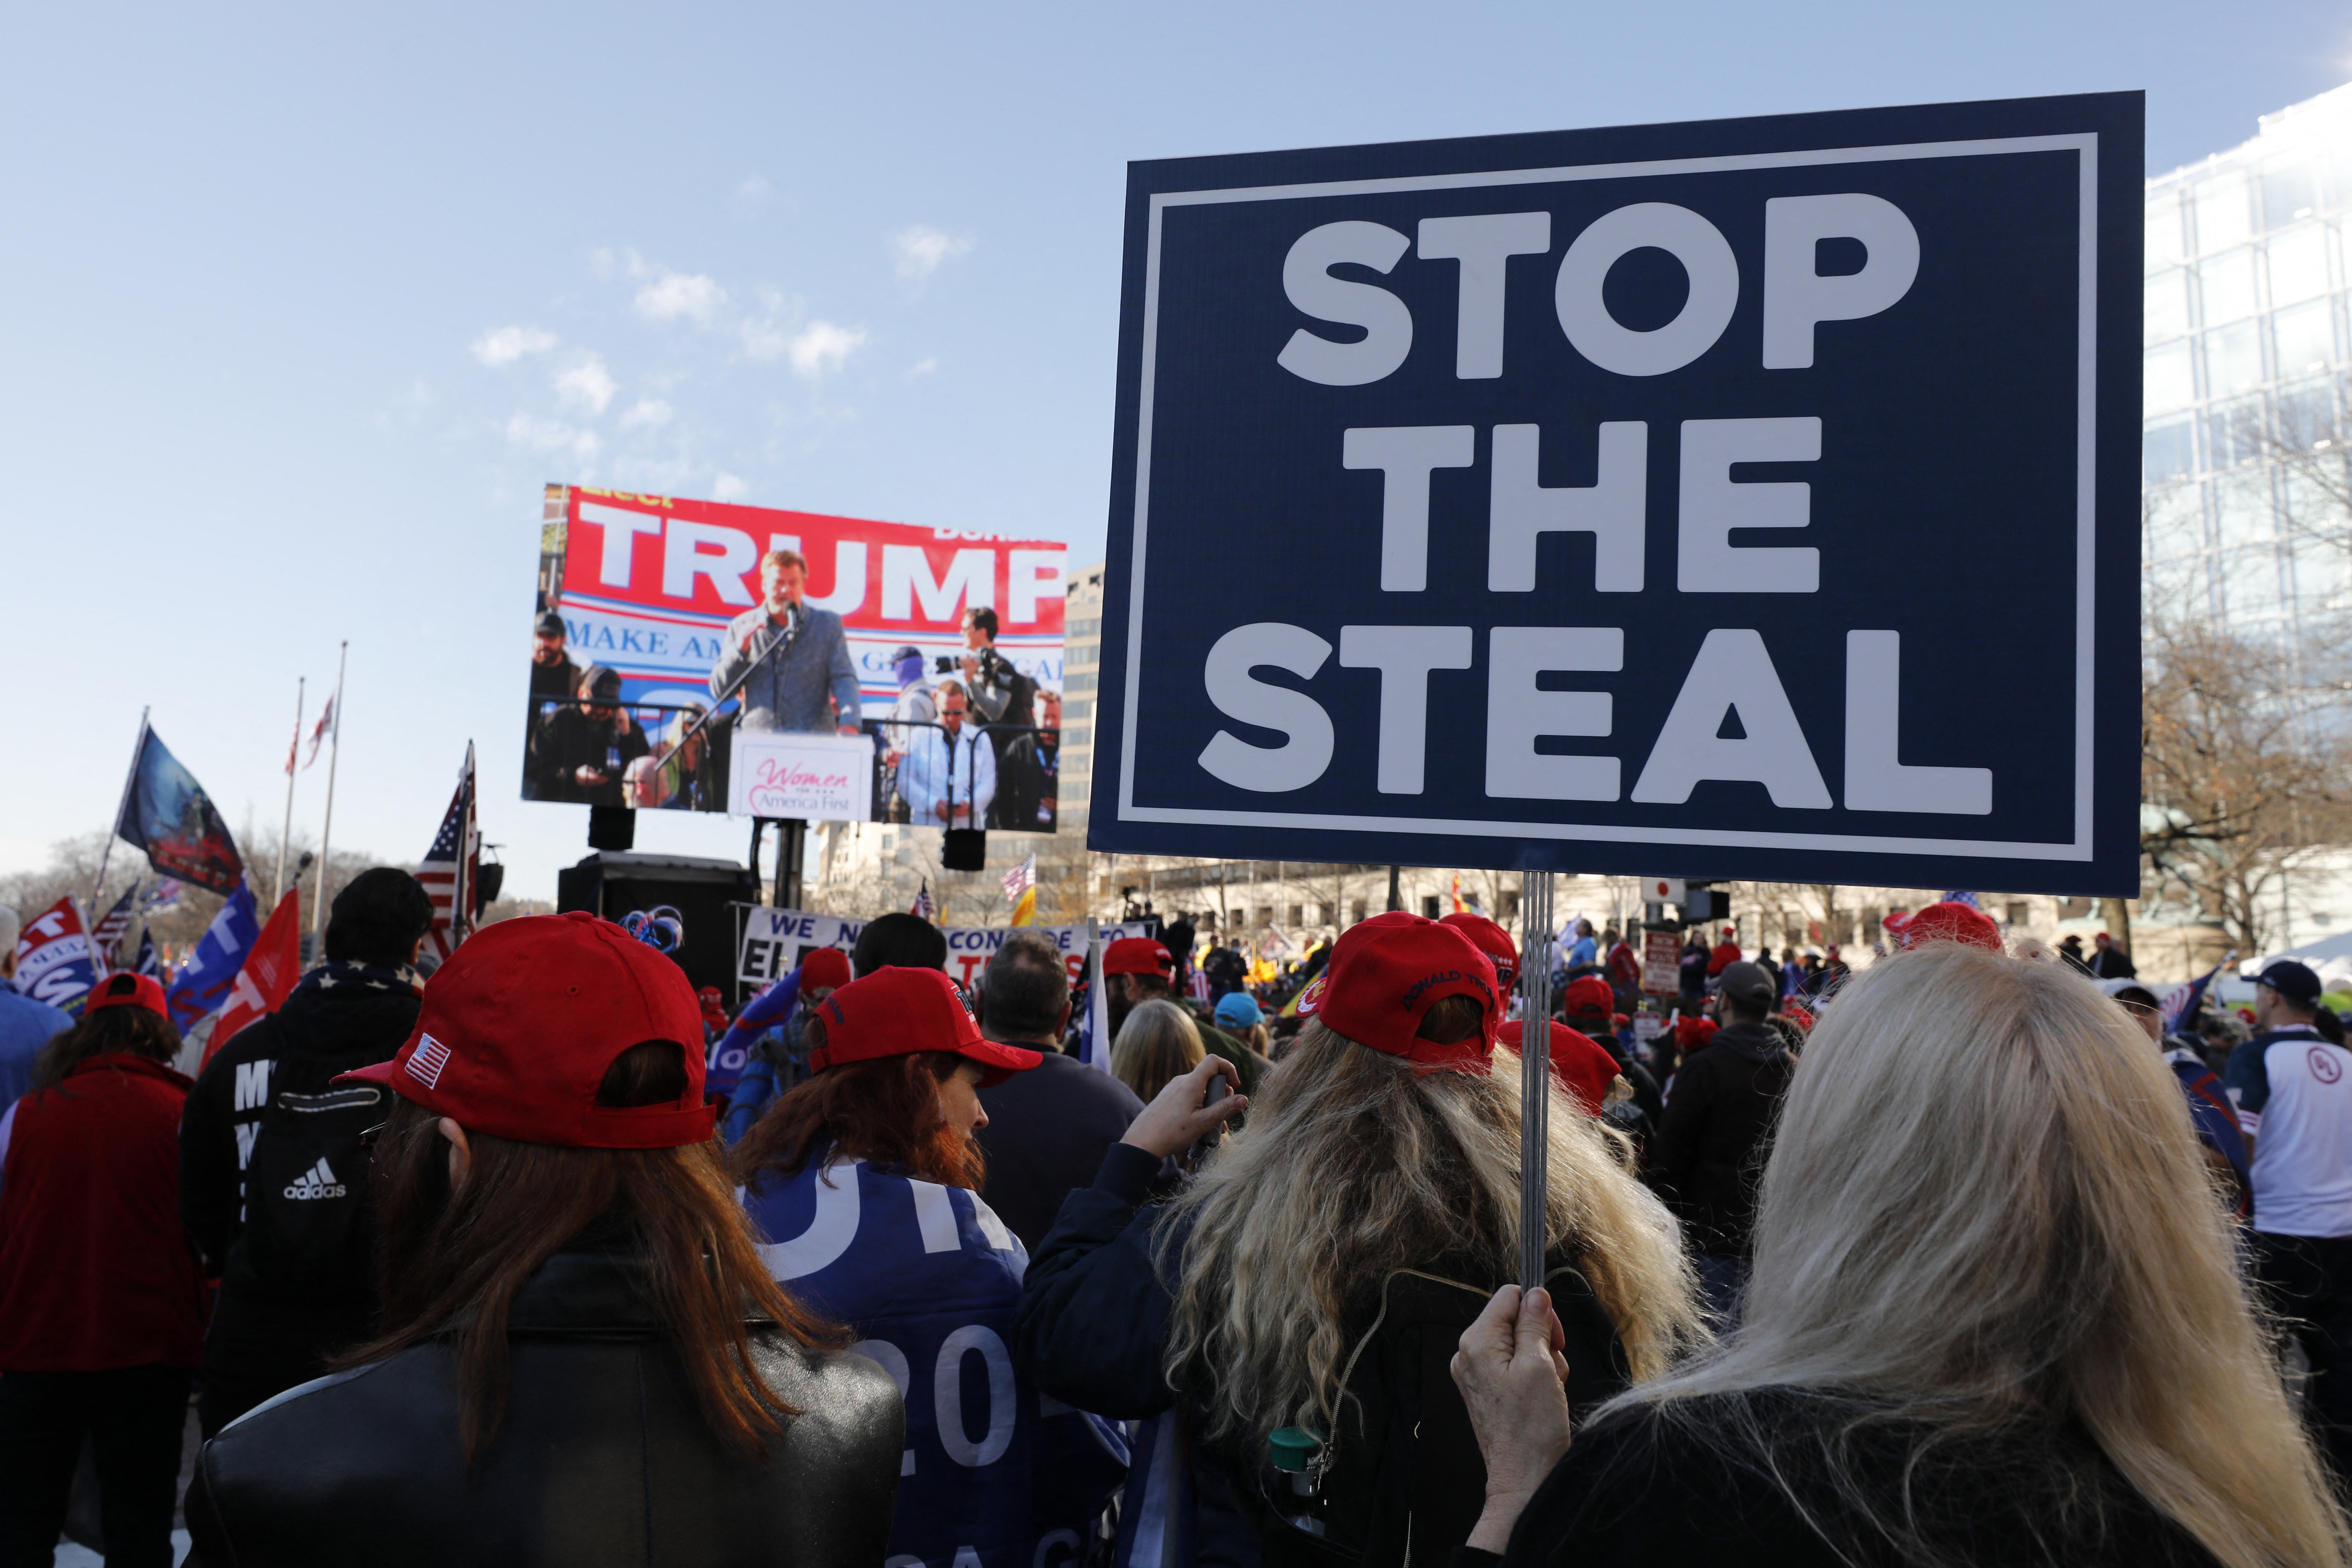 Trump supporters gather for the Stop the Steal rally at Freedom Plaza in Washington on December 12, 2020. Photo by Yuri Gripas/ABACAPRESS.COM.